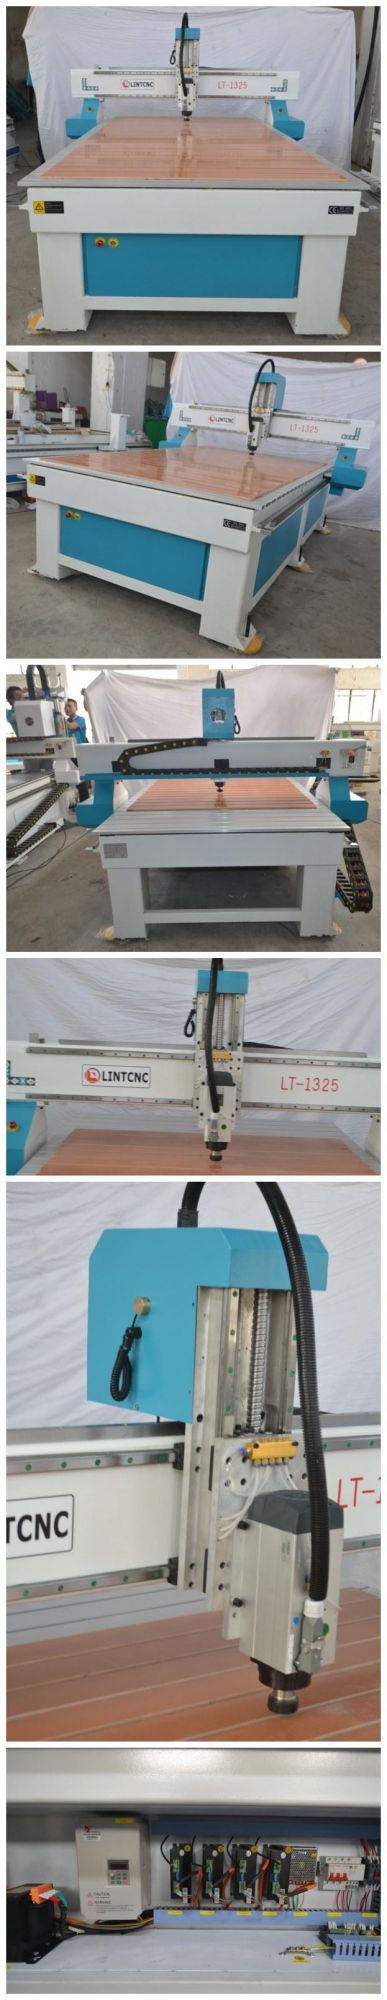 4 Axis CNC Engraver 1325 Wood Working CNC Router for Wood Soft Metal, Aluminum, MDF